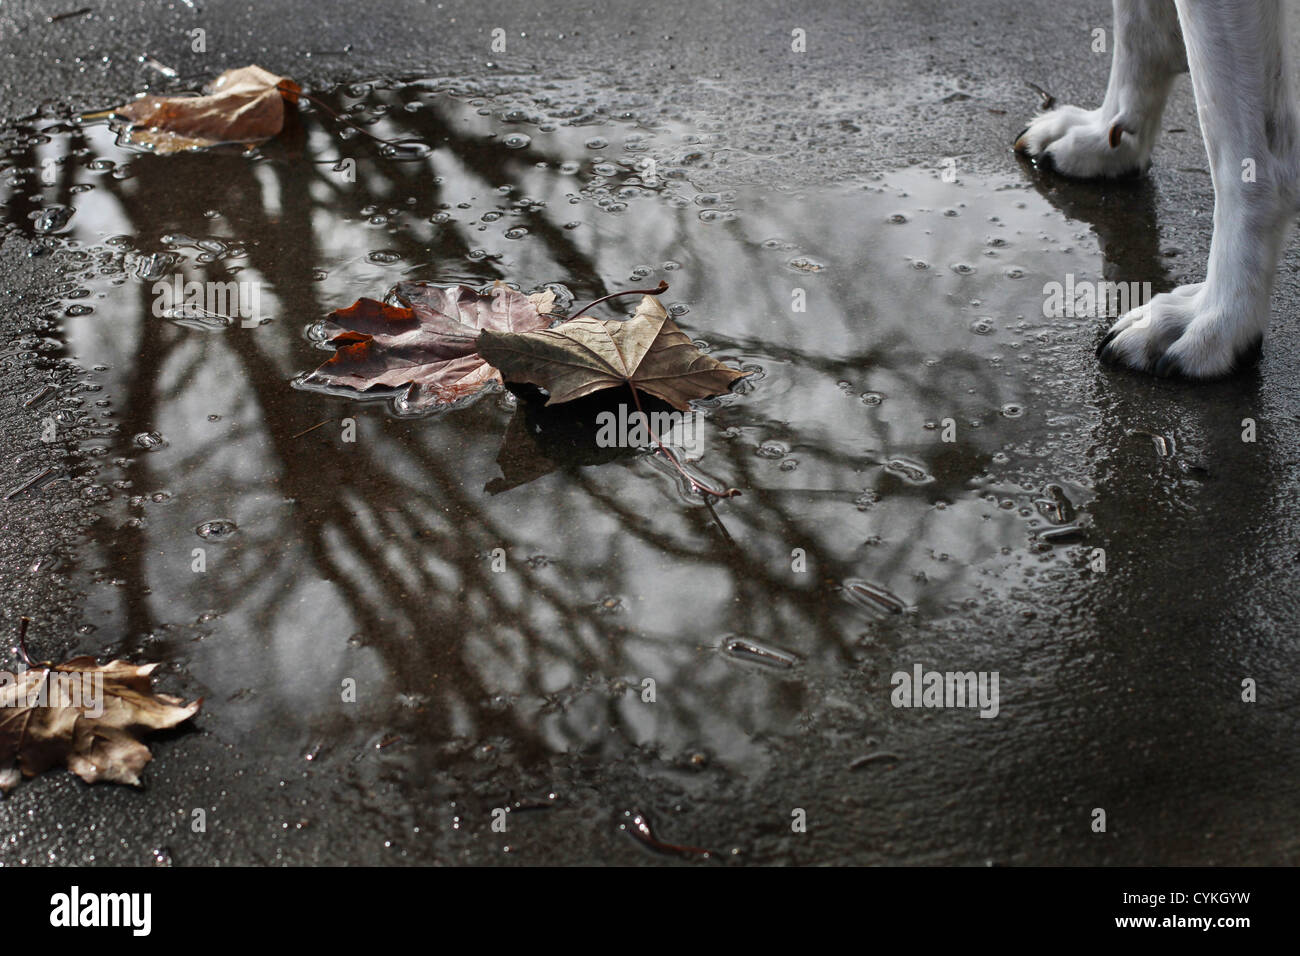 Dogs paws next to a puddle with leaves. Stock Photo